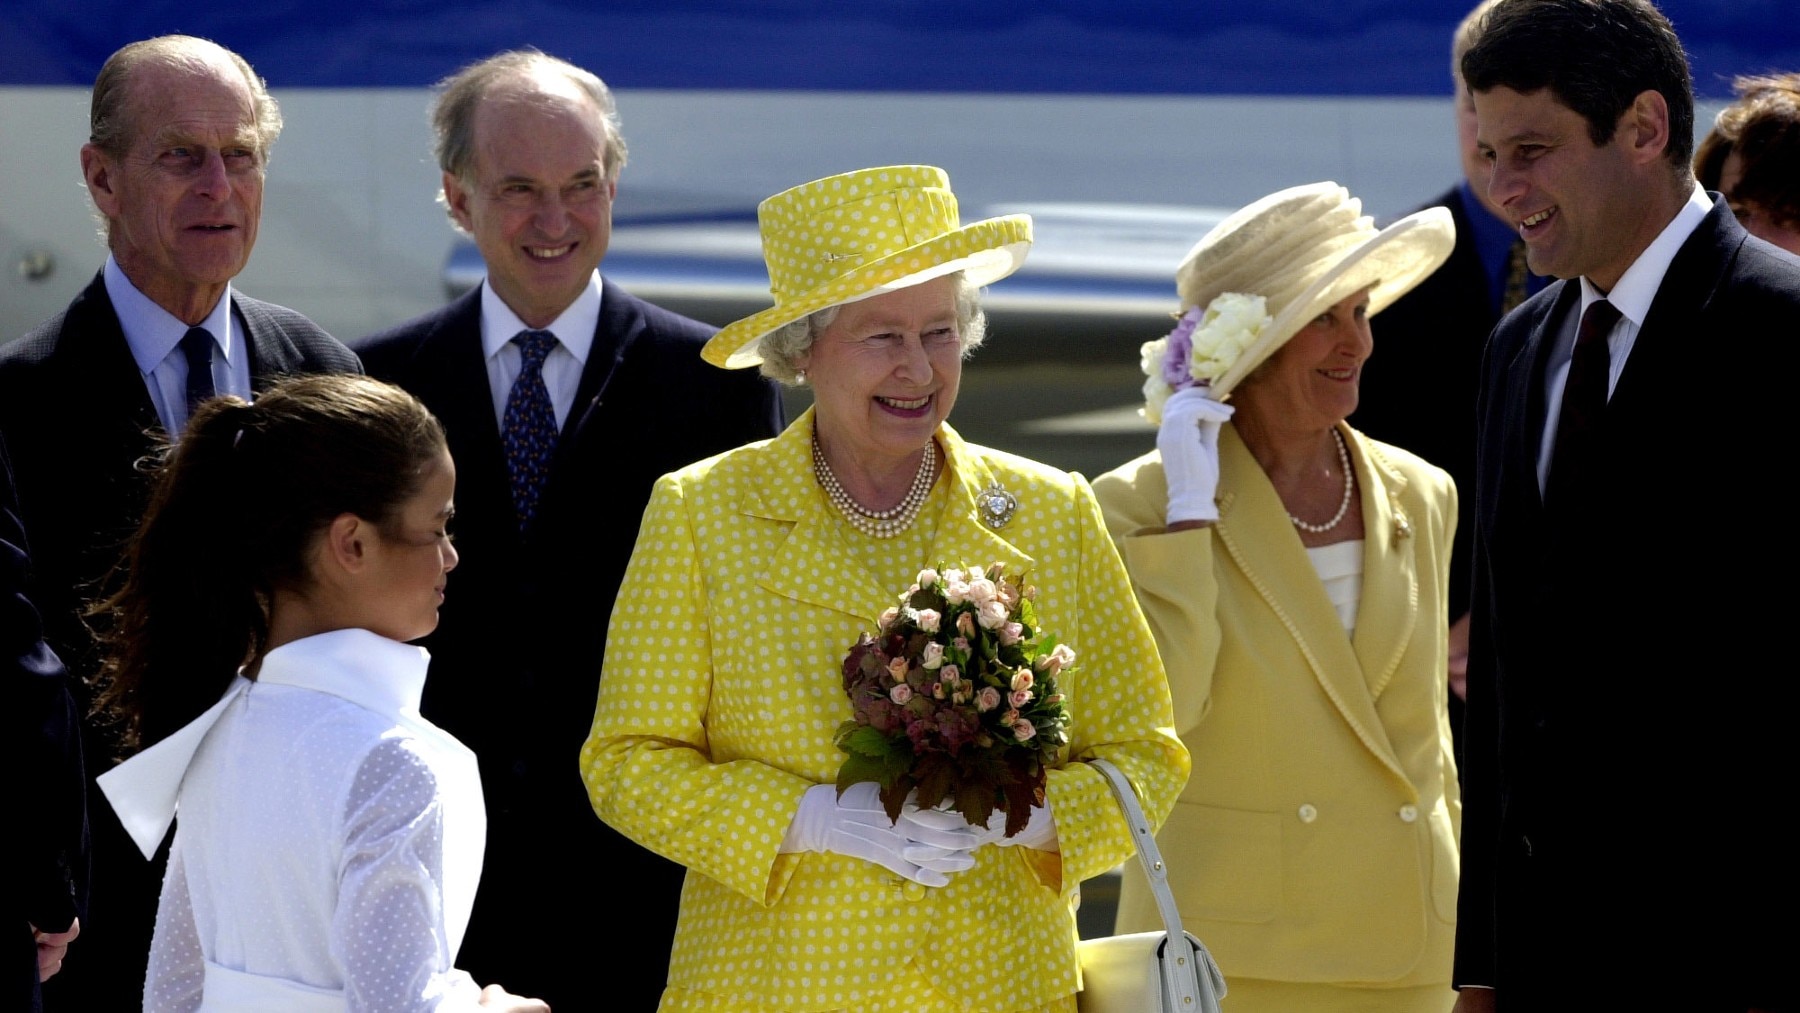 23 March 2000. Queen Elizabeth II arrives in Melbourne for the first time in twelve years and is gifted with flowers by Amy Bracks in white. Also pictured (left to right) is Duke of Edinburgh, Prince Philip, Victorian Governer Sir James Gobbo, Lady Gobbo 